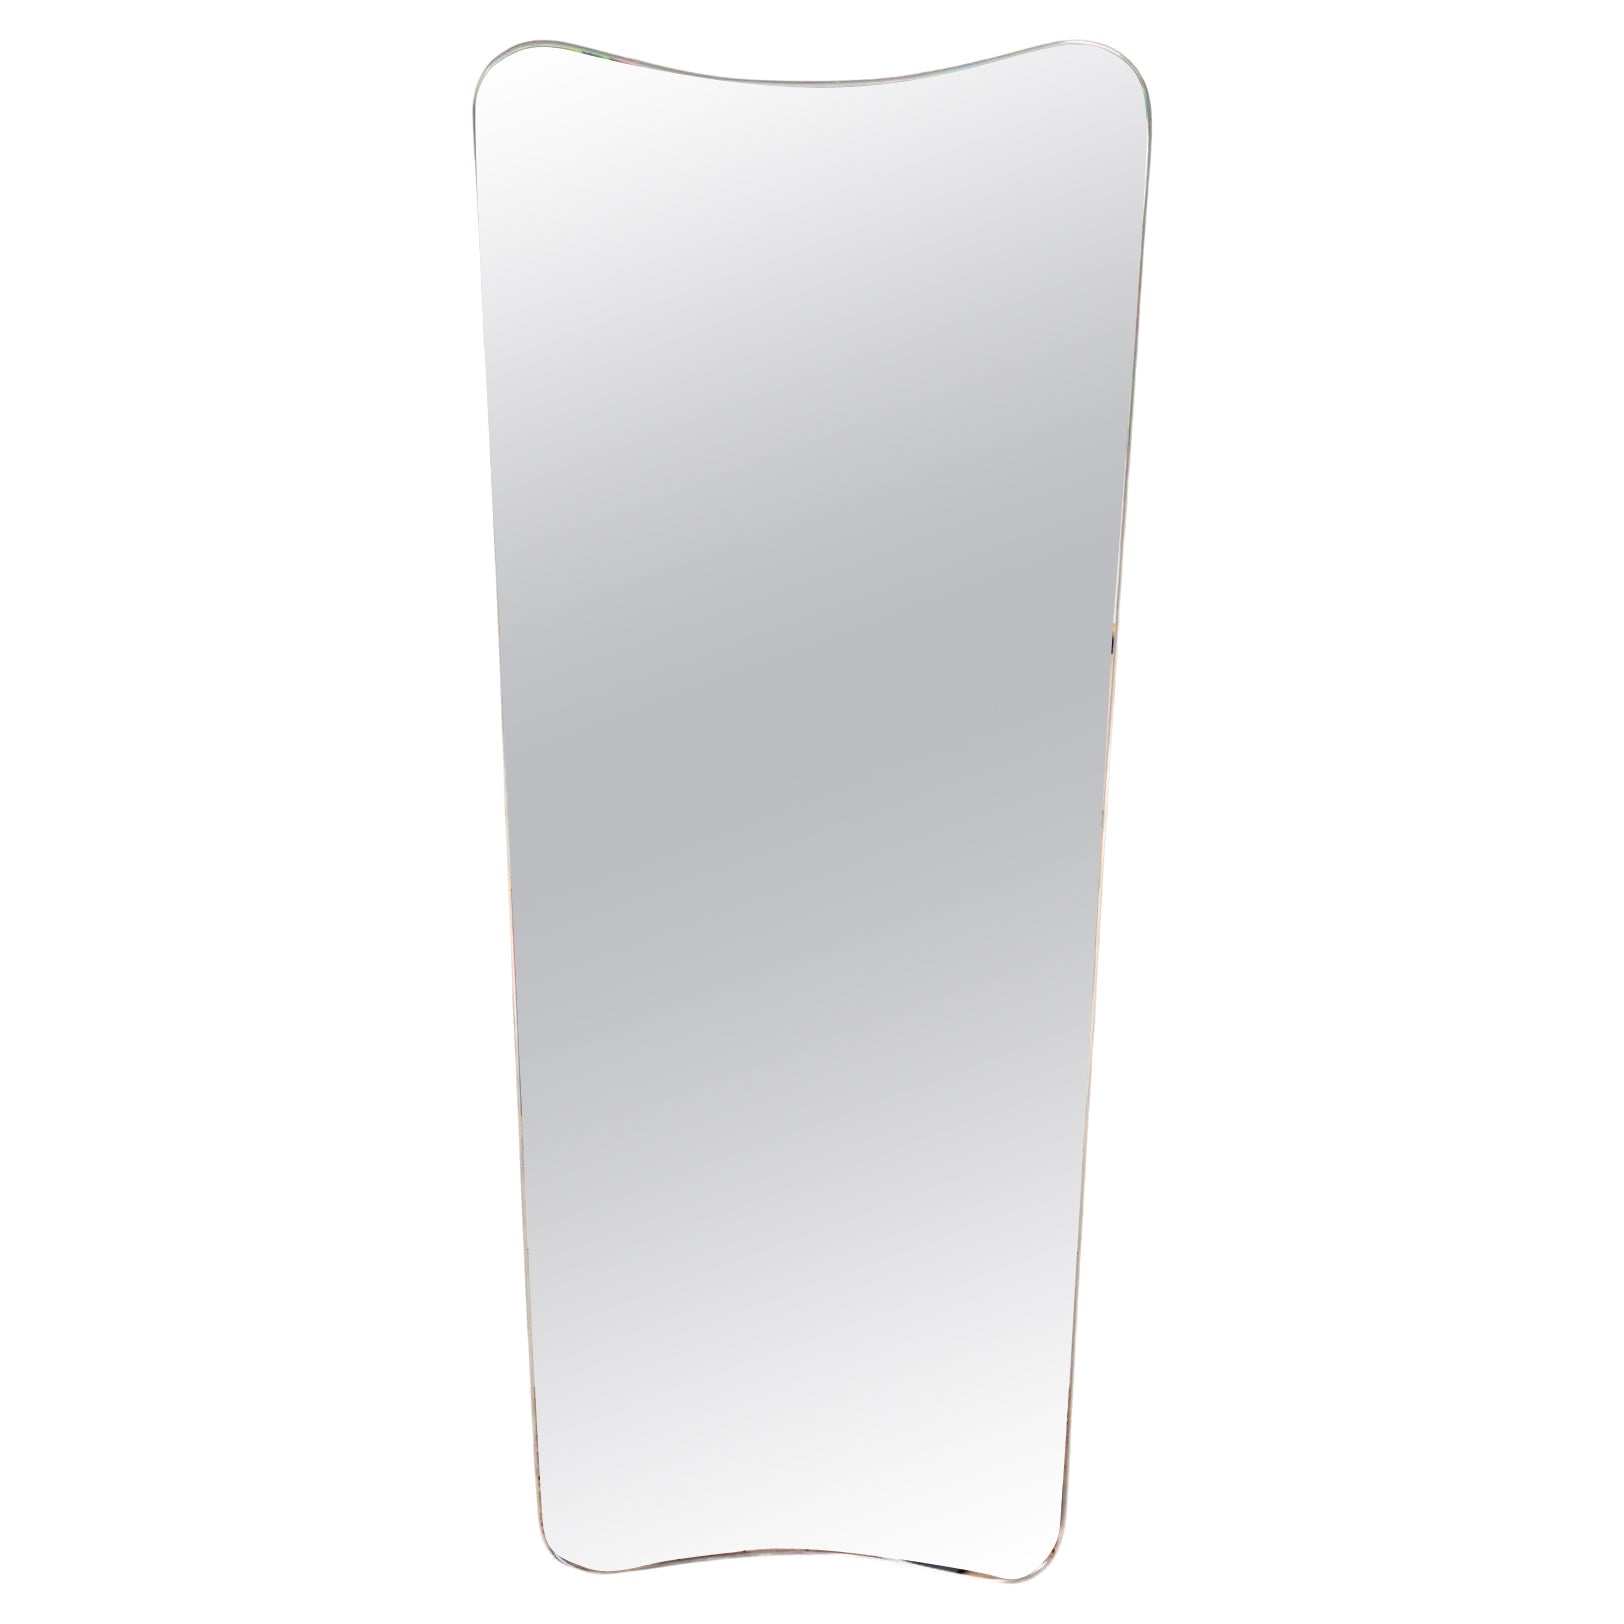 Italian brass framed mirror in the manner of Gio Ponti. Contemporary